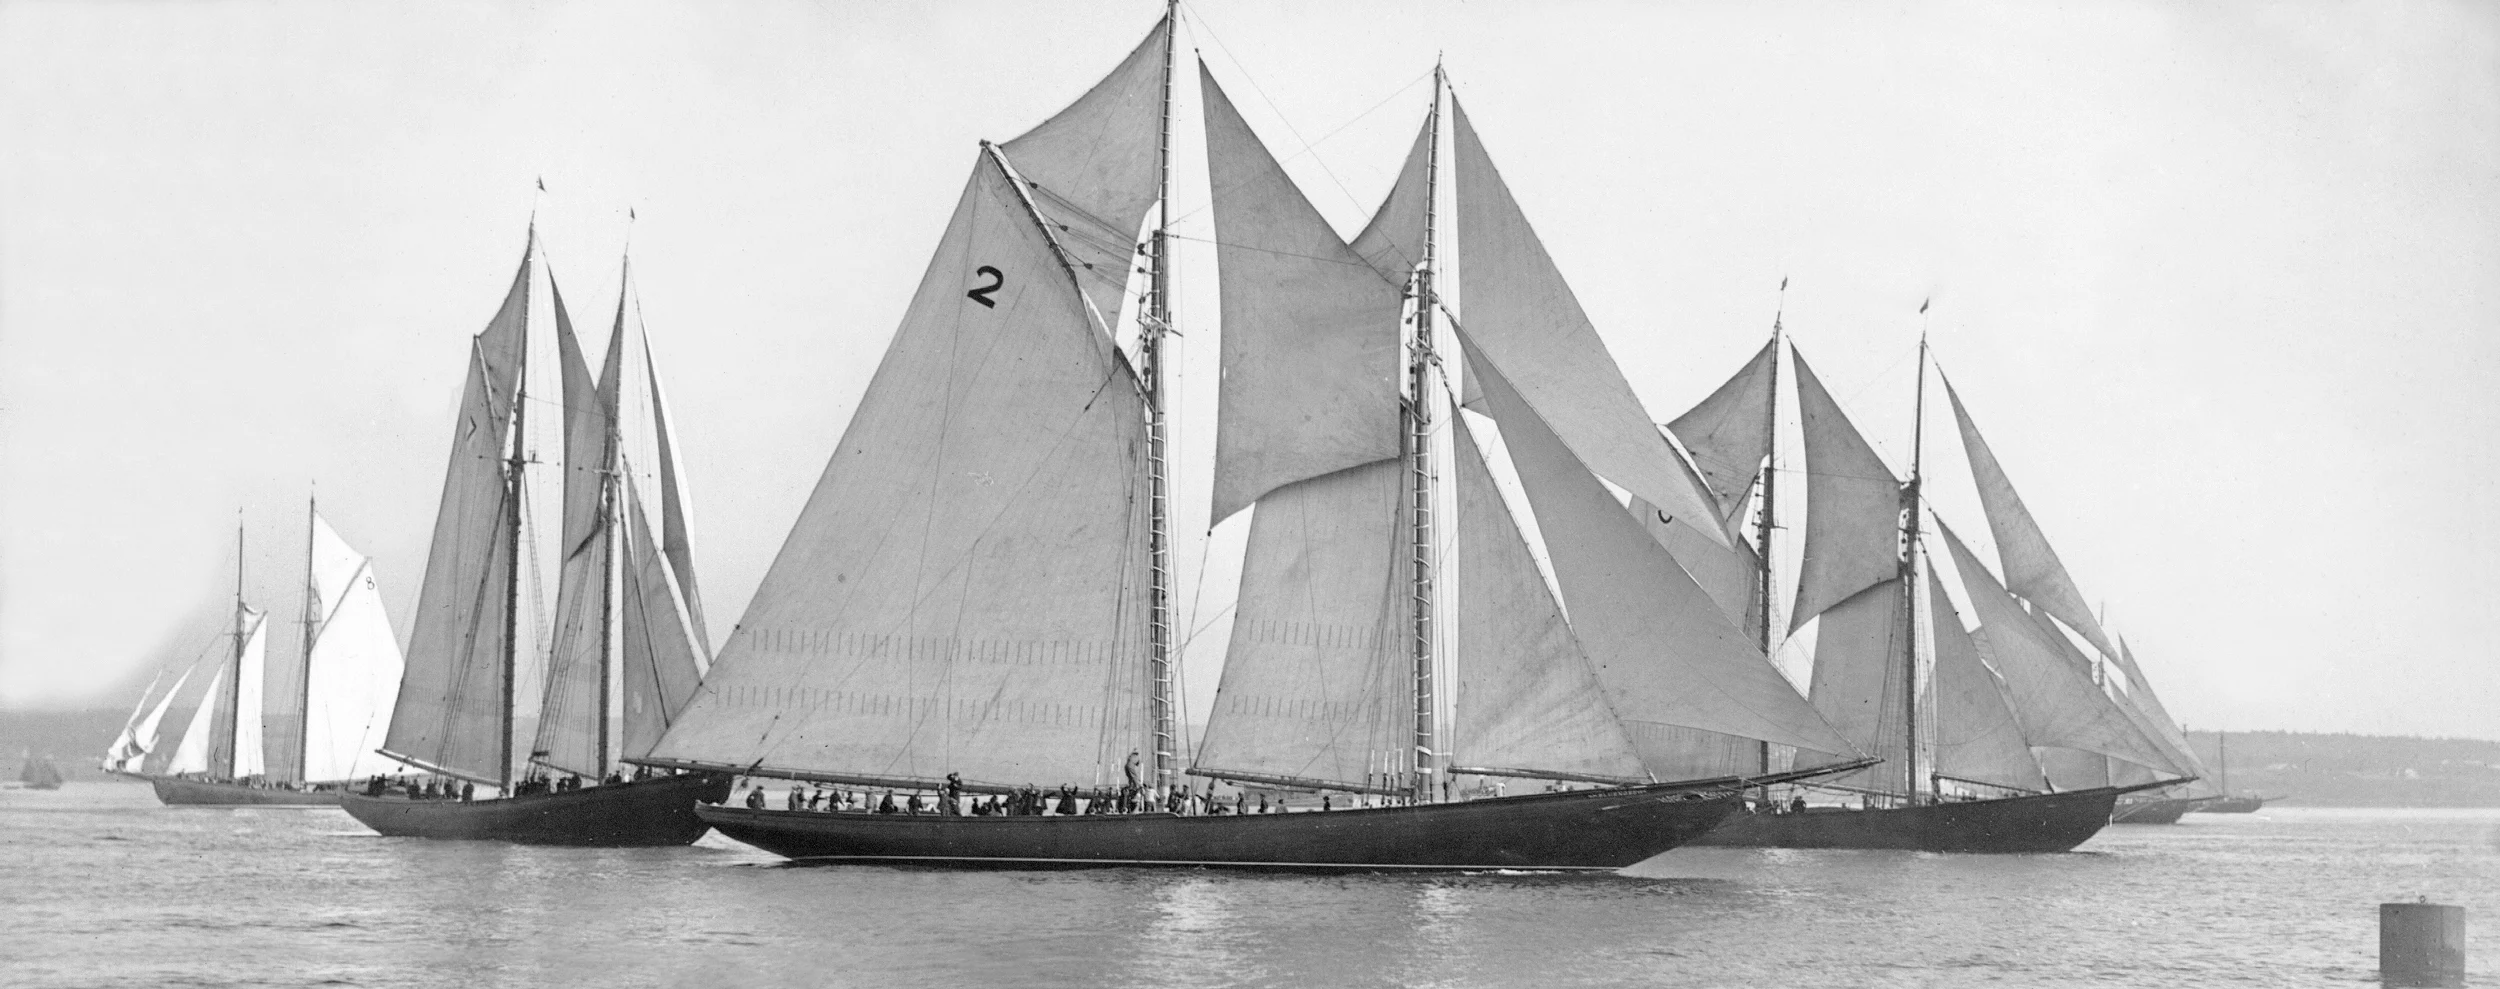 Bluenose - RCM - Bluenose Coming Up to the Start of the First Elimination Race in 1921